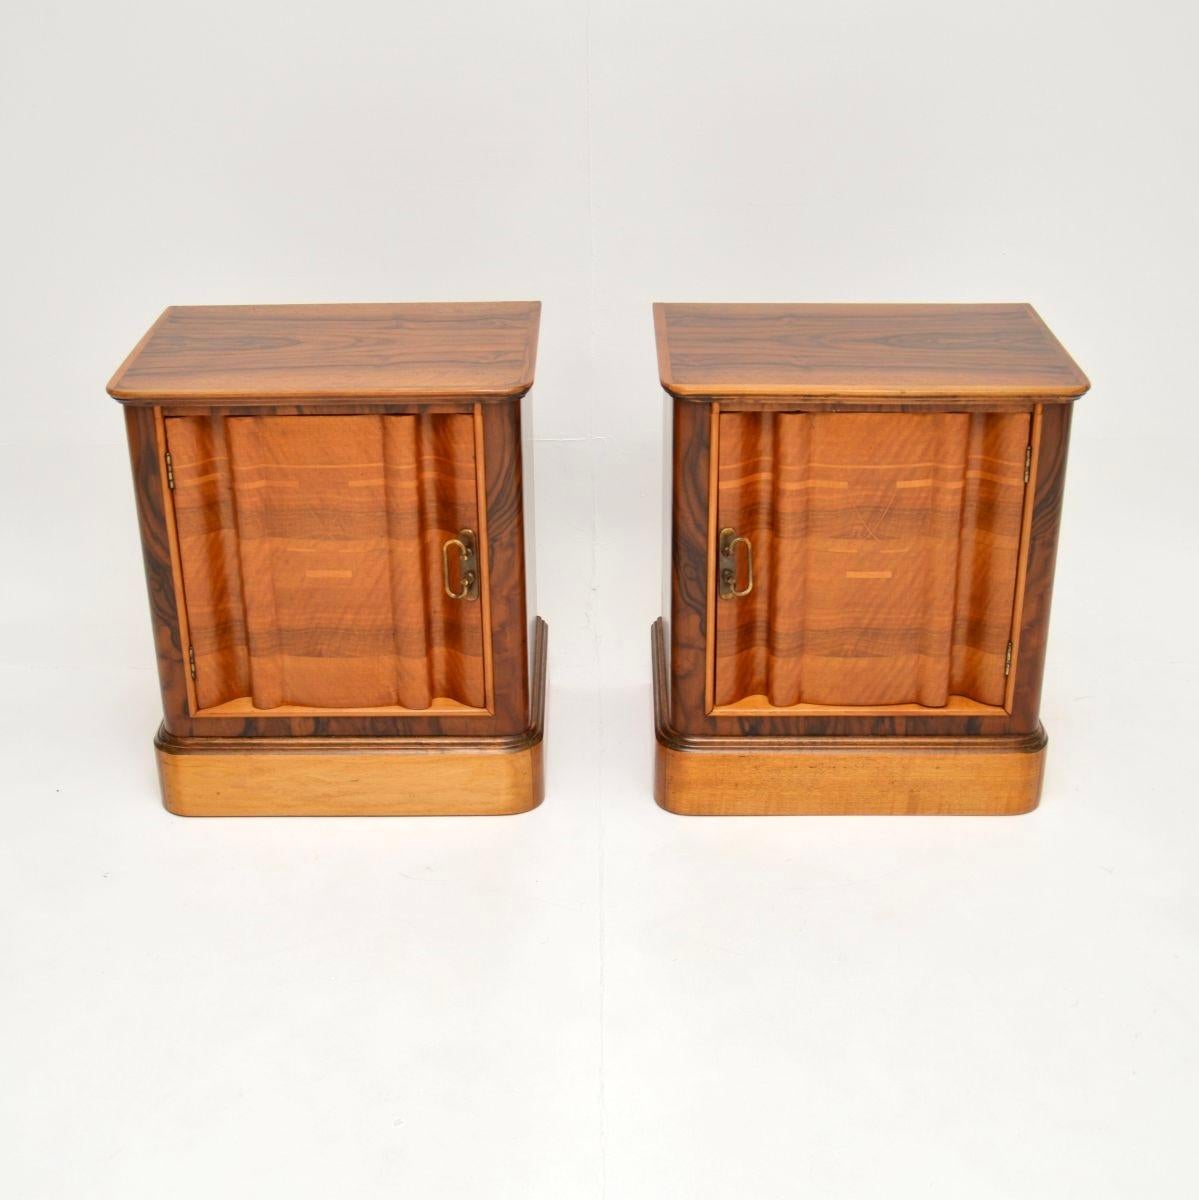 A stunning pair of Swedish inlaid walnut Art Deco bedside cabinets. They were recently imported from Sweden, they date from the 1920-30’s.

The quality is exceptional, they are beautifully designed and are a very useful size. There are stunning